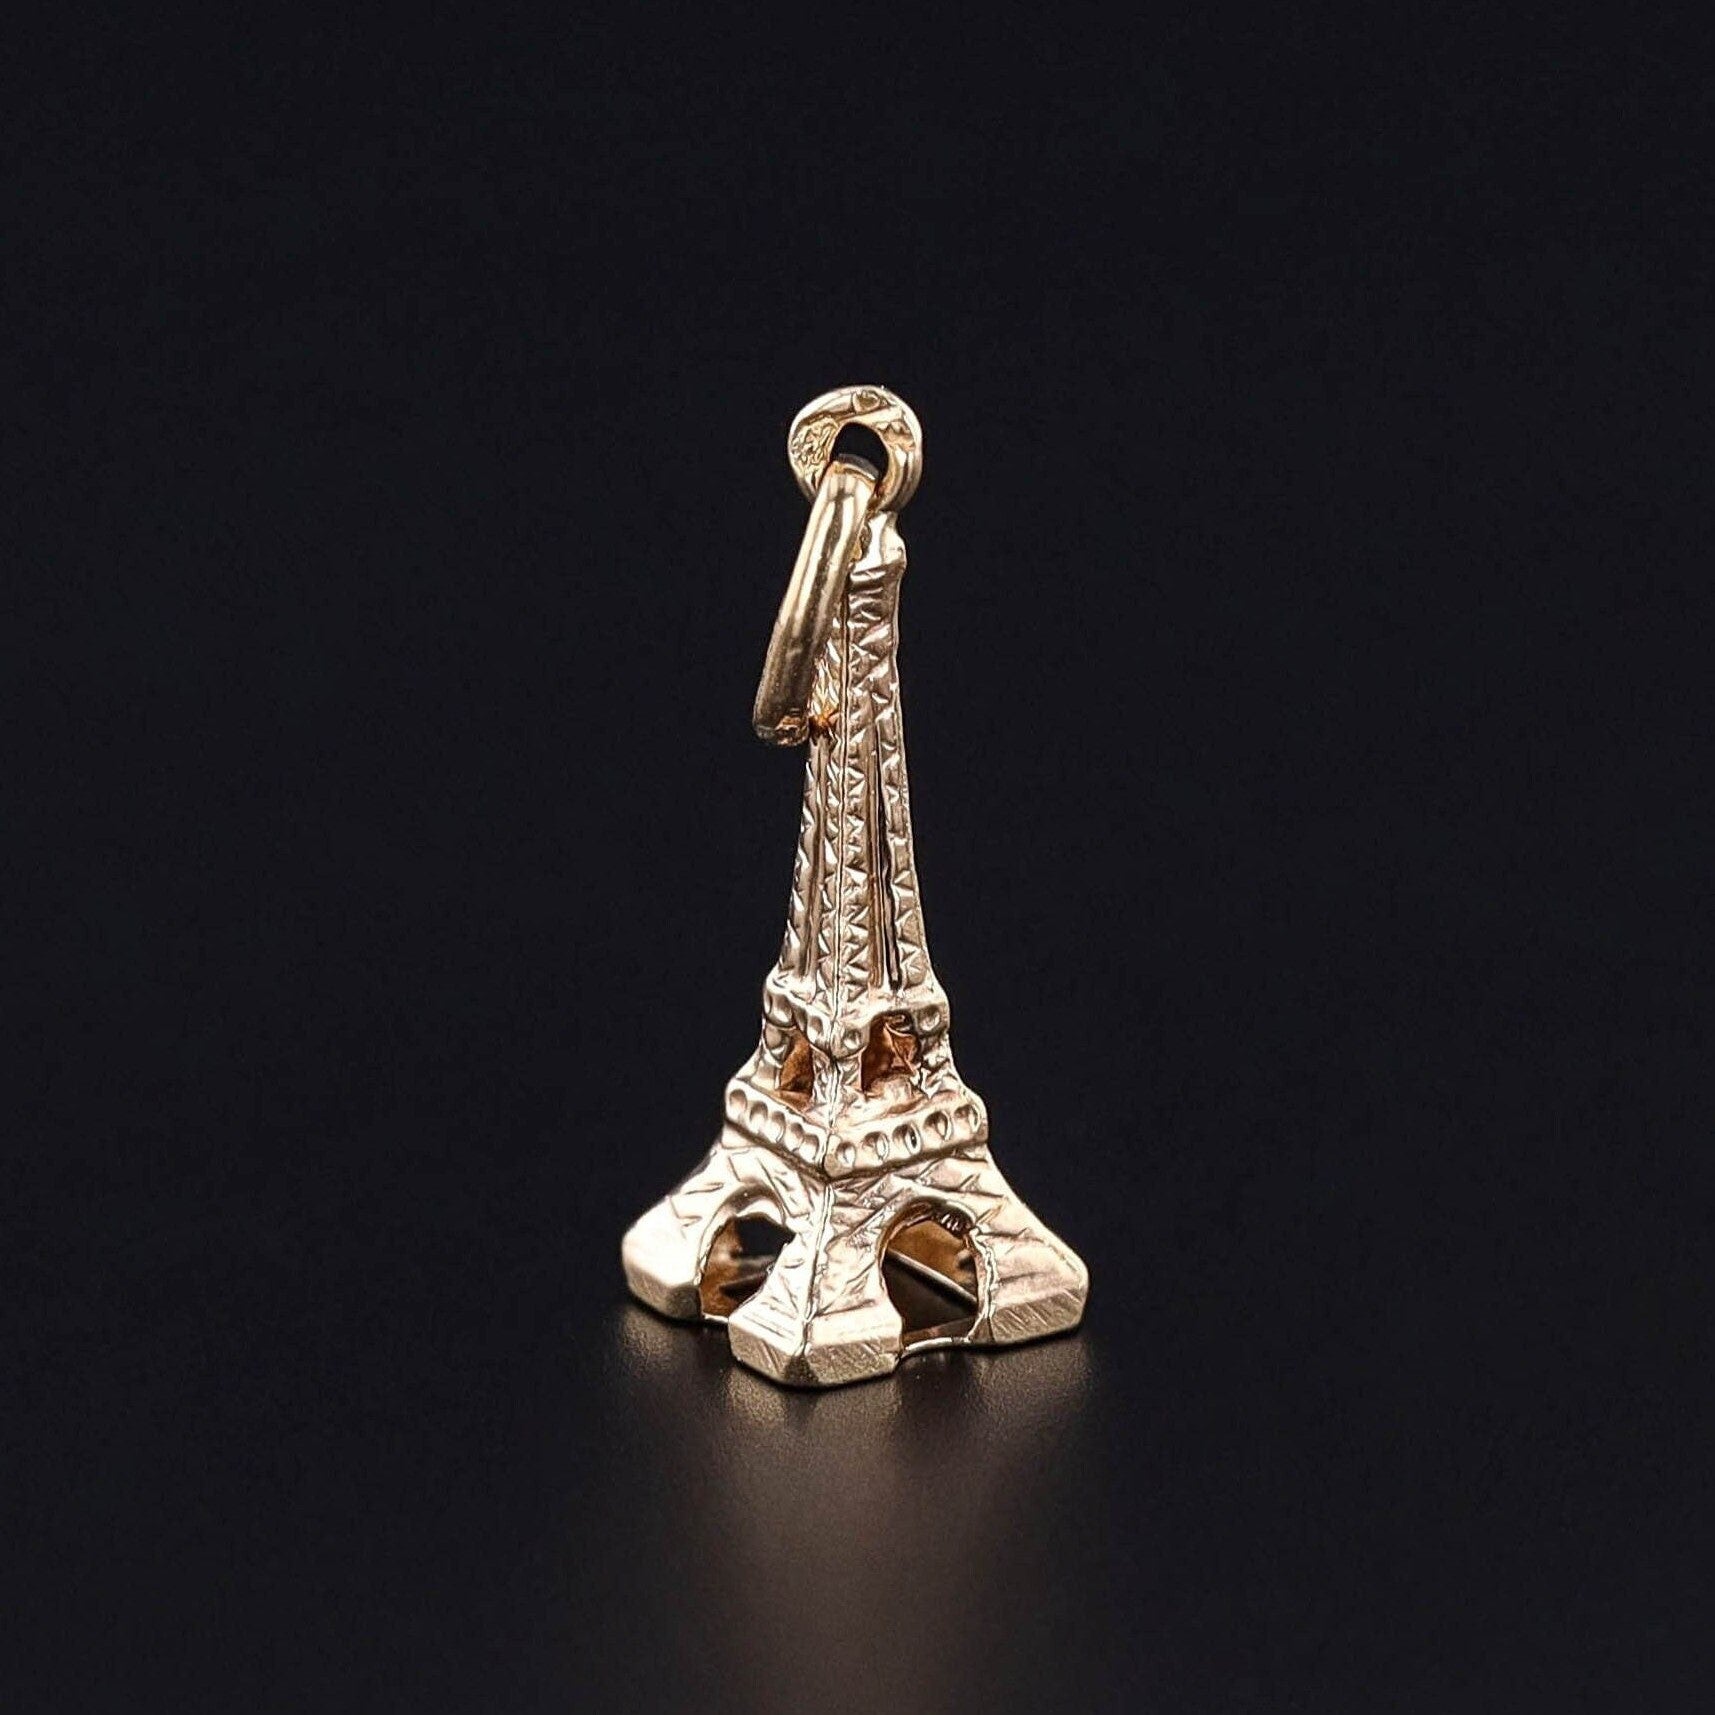 Vintage Eiffel Tower Charm of 18k Gold